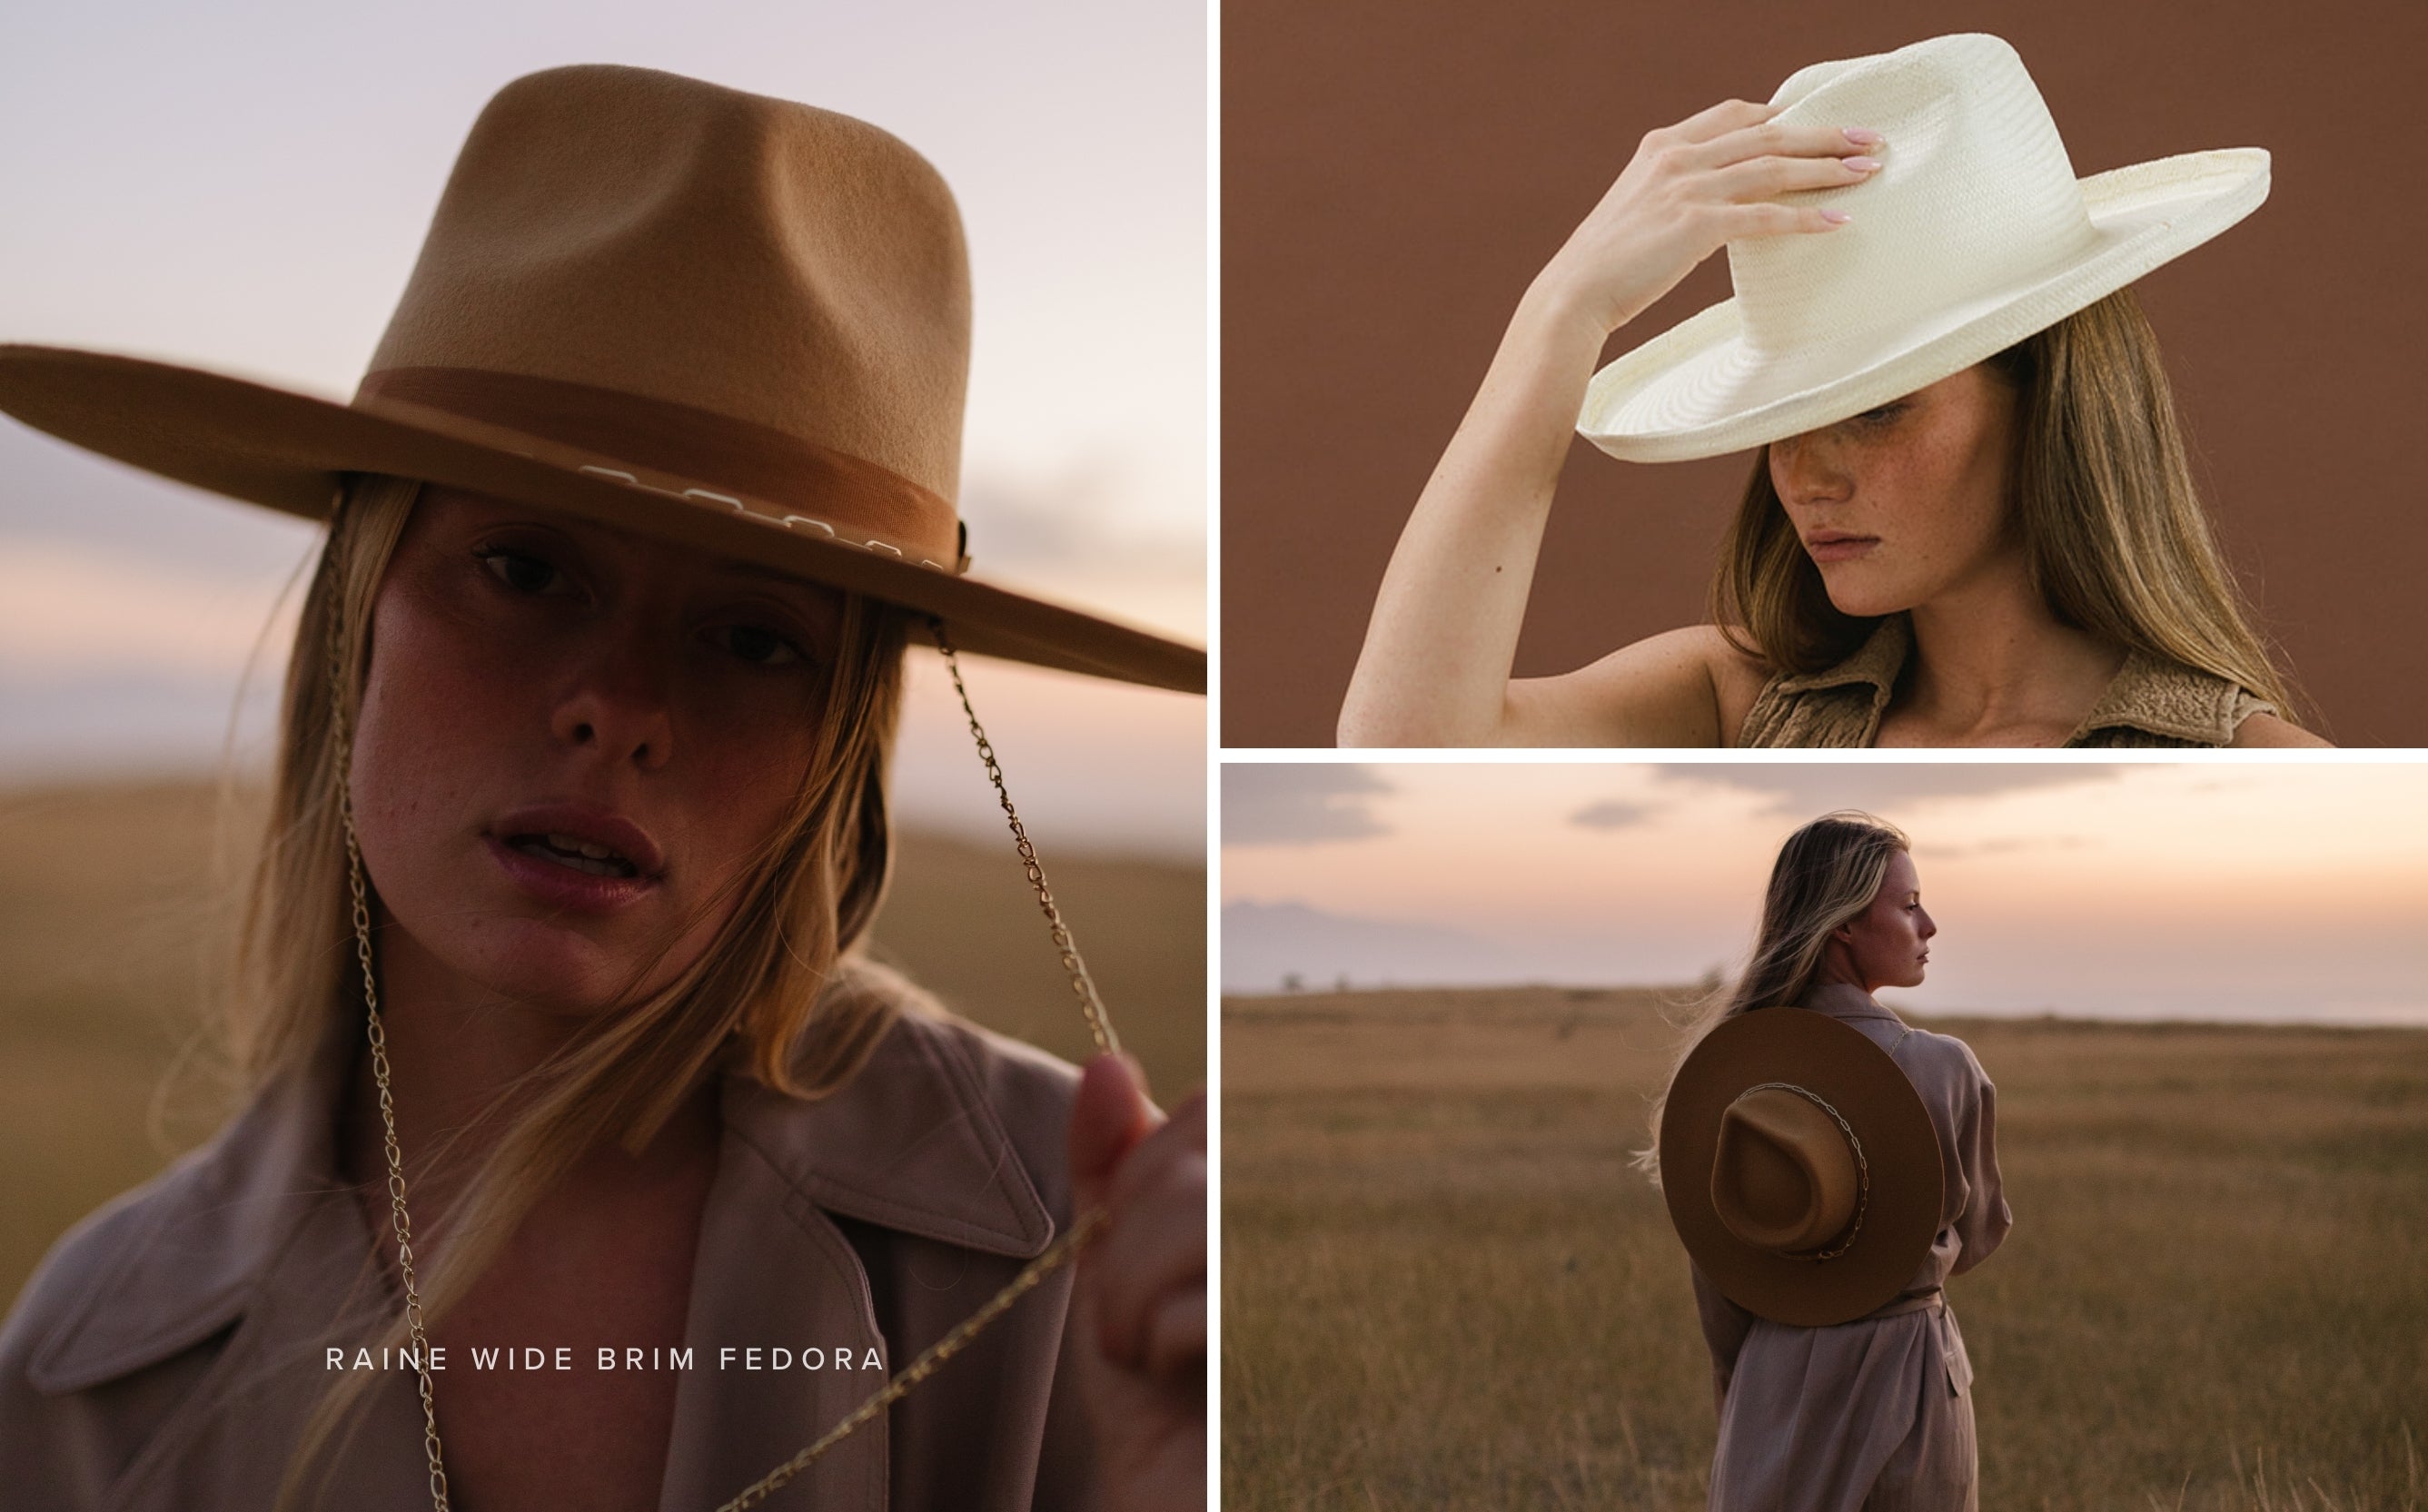 3 photos of women wearing brimmed hats